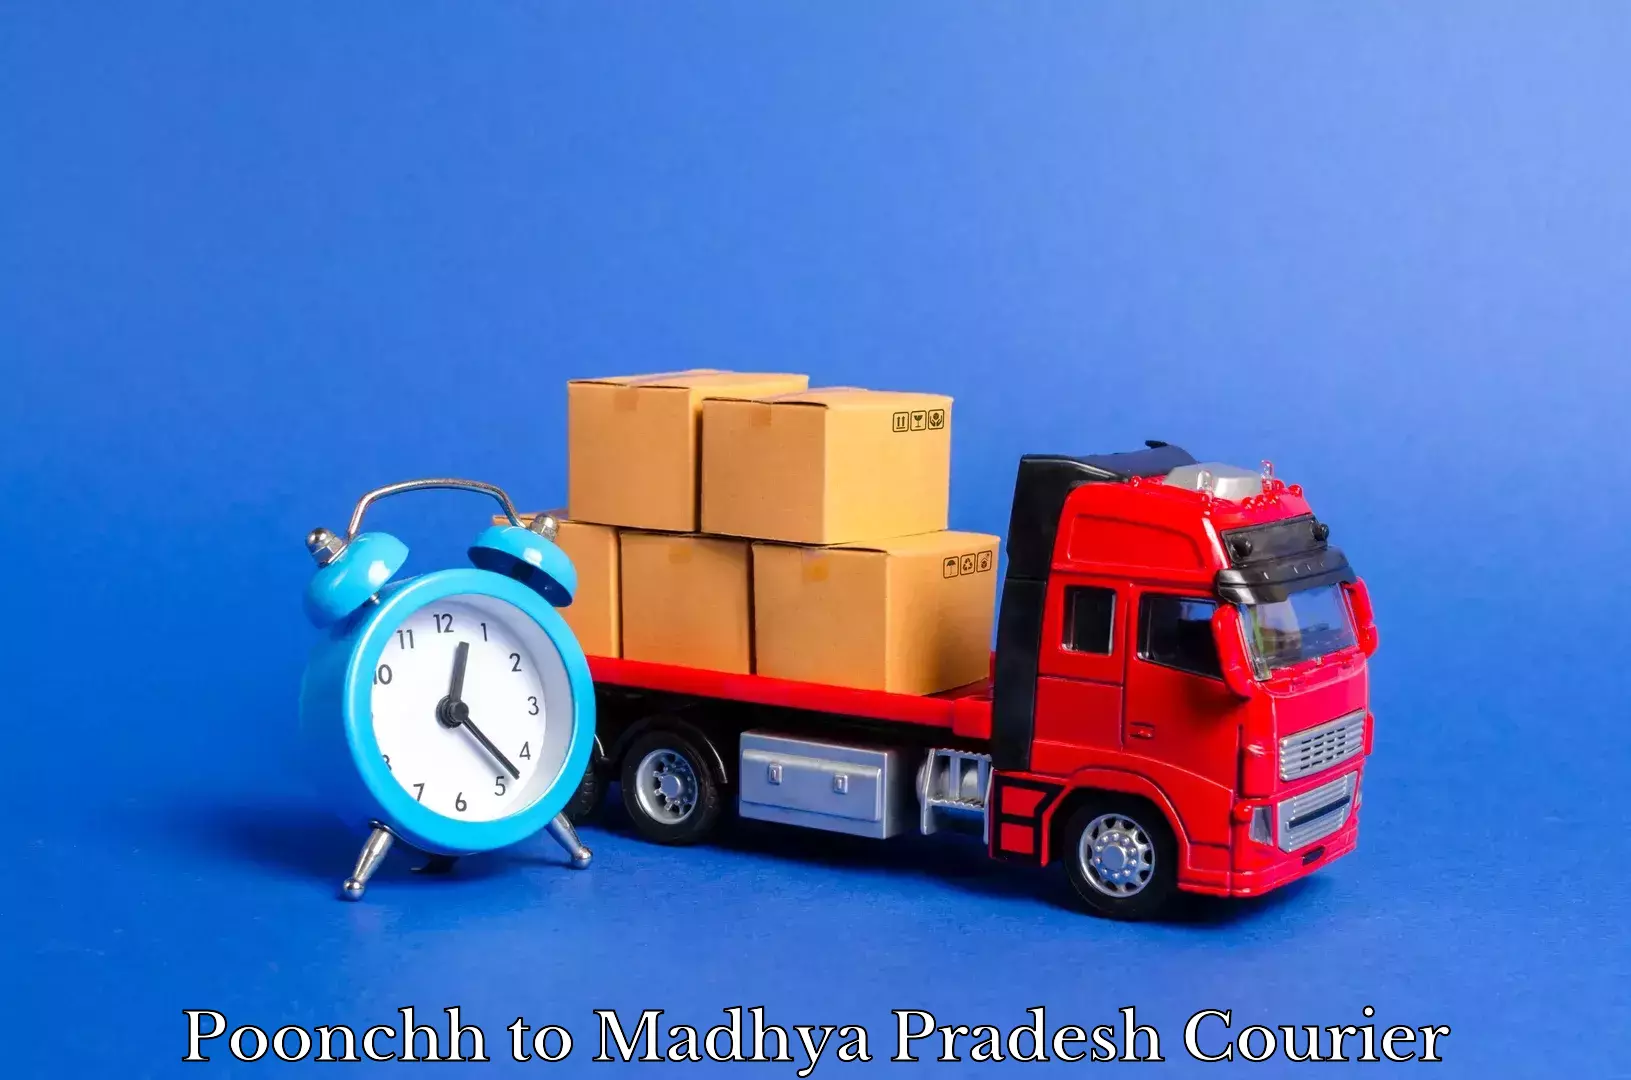 Furniture moving specialists Poonchh to Chhatarpur